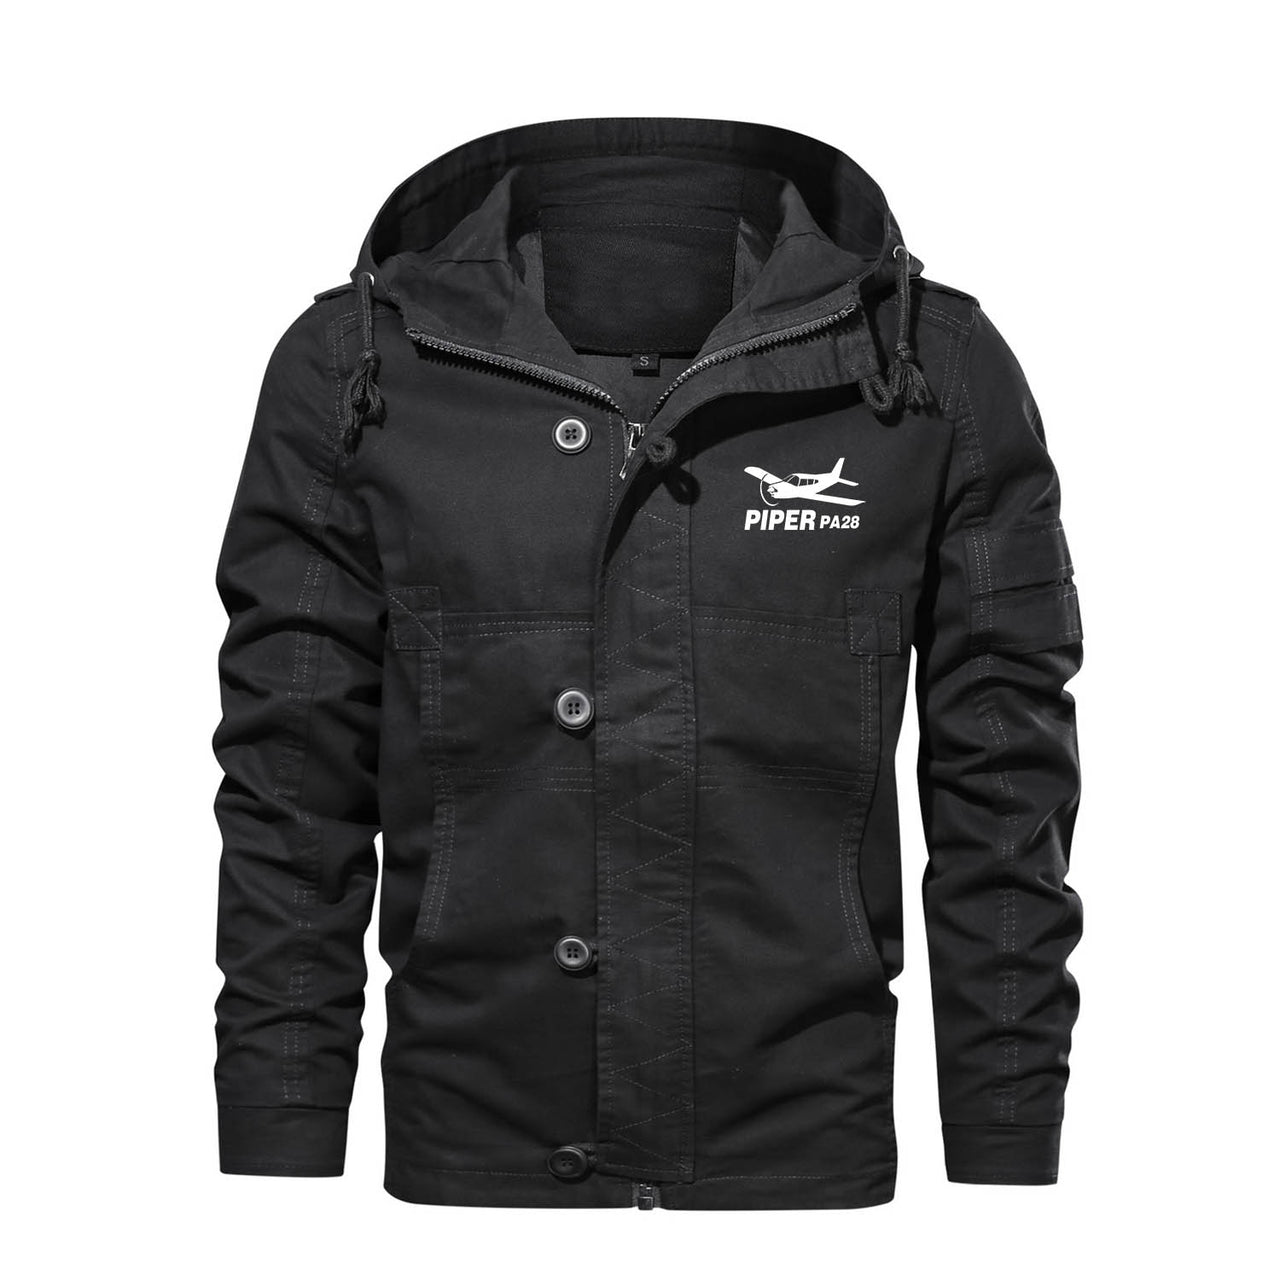 The Piper PA28 Designed Cotton Jackets